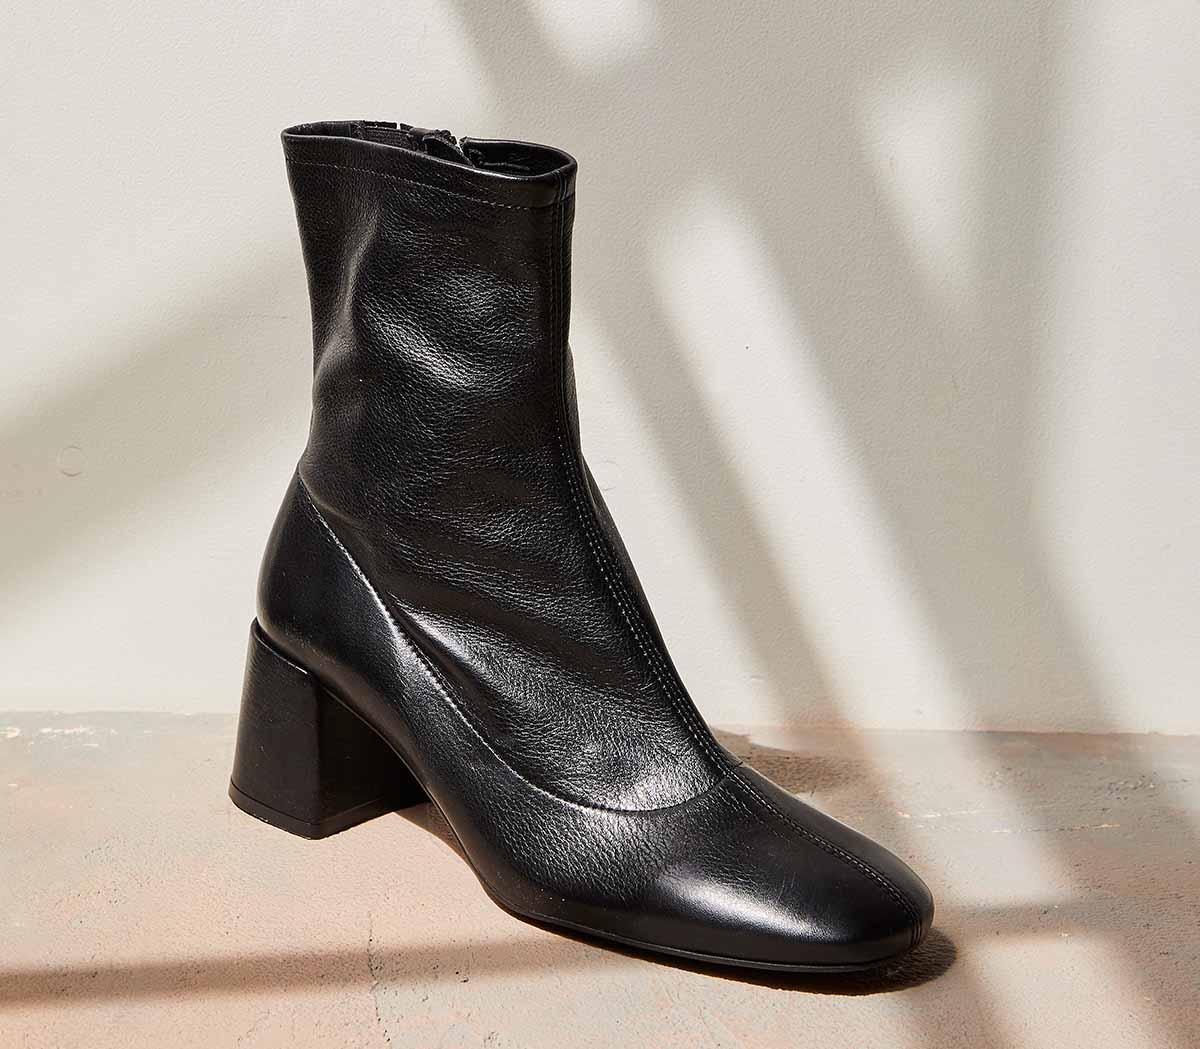 OFFICEAlexia Unlined Ankle BootsBlack Leather